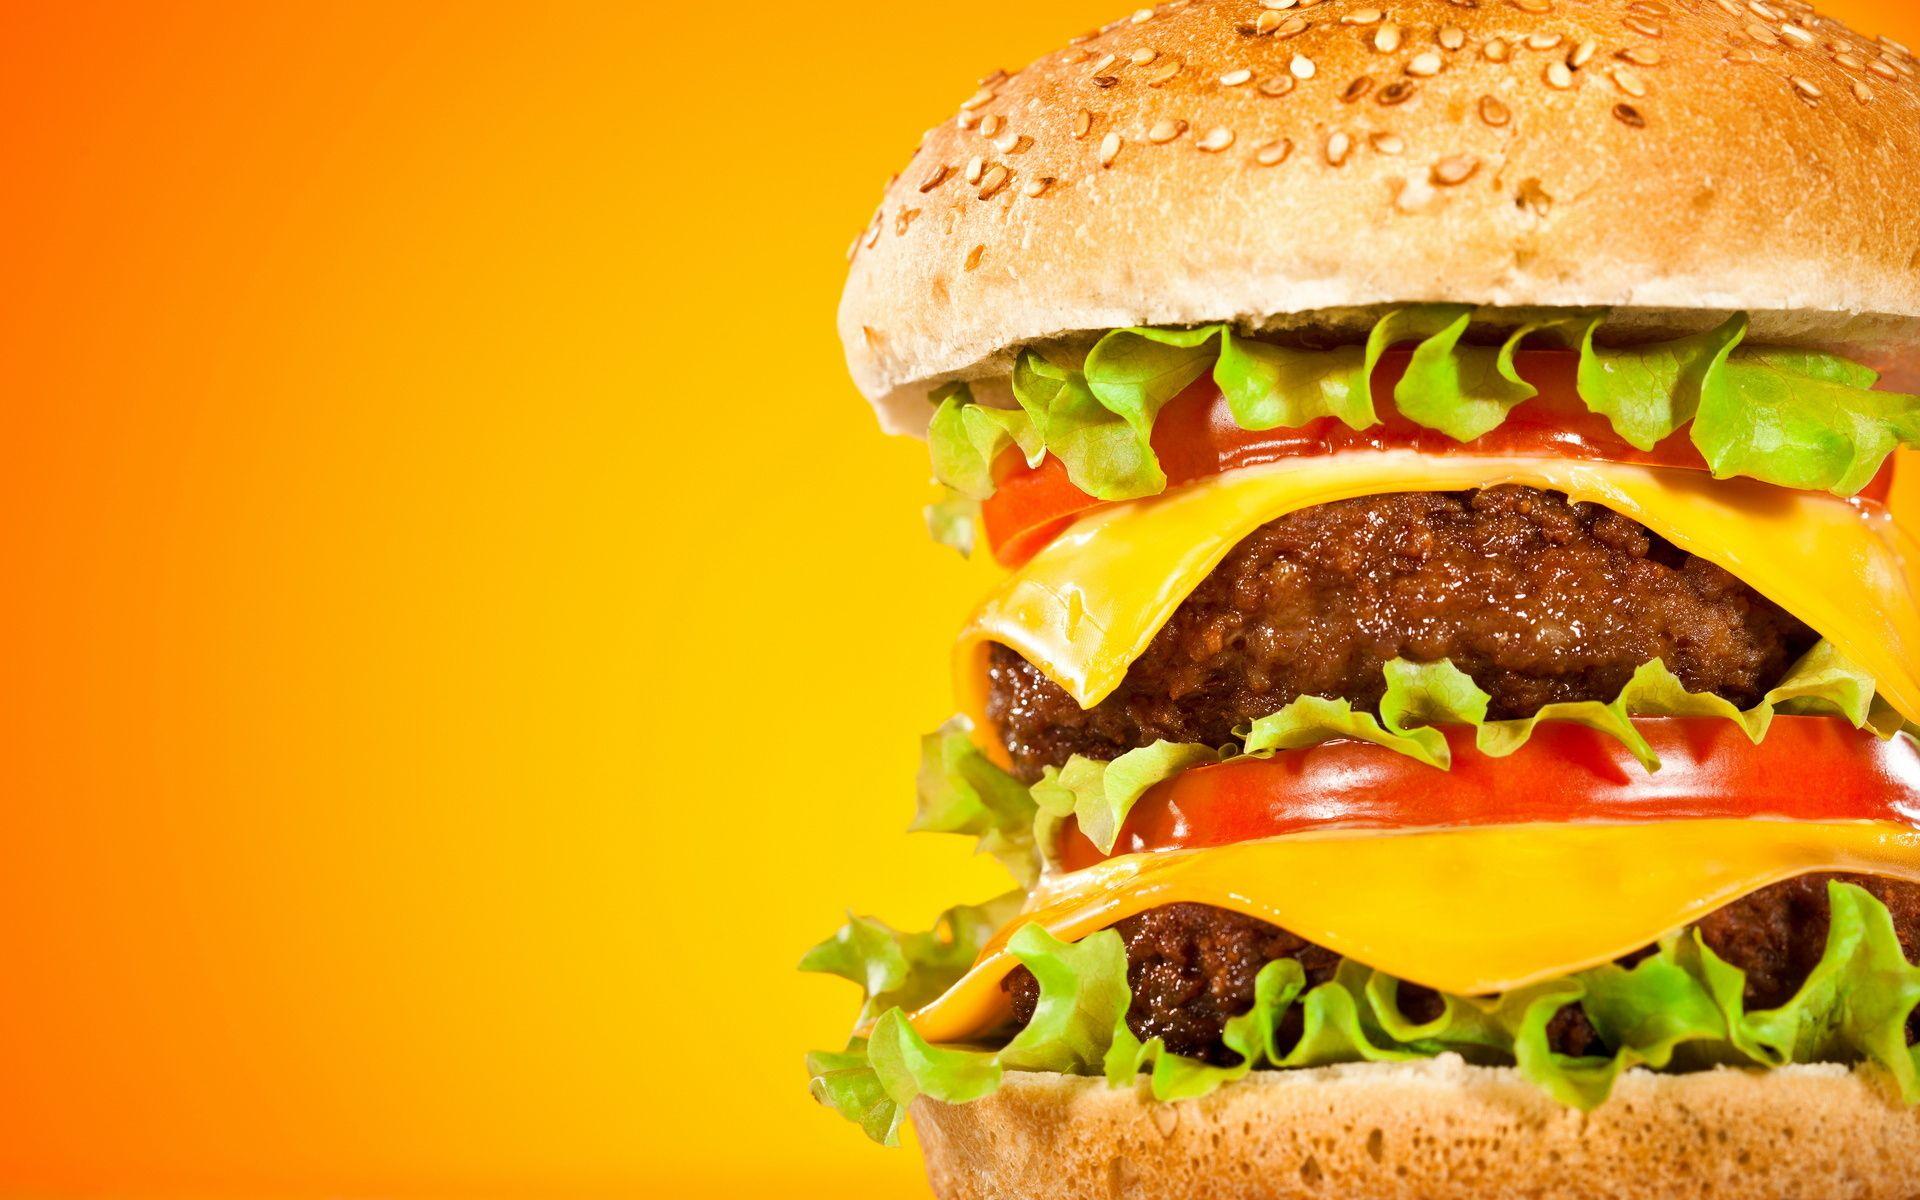 Burger Wallpaper and Background Image